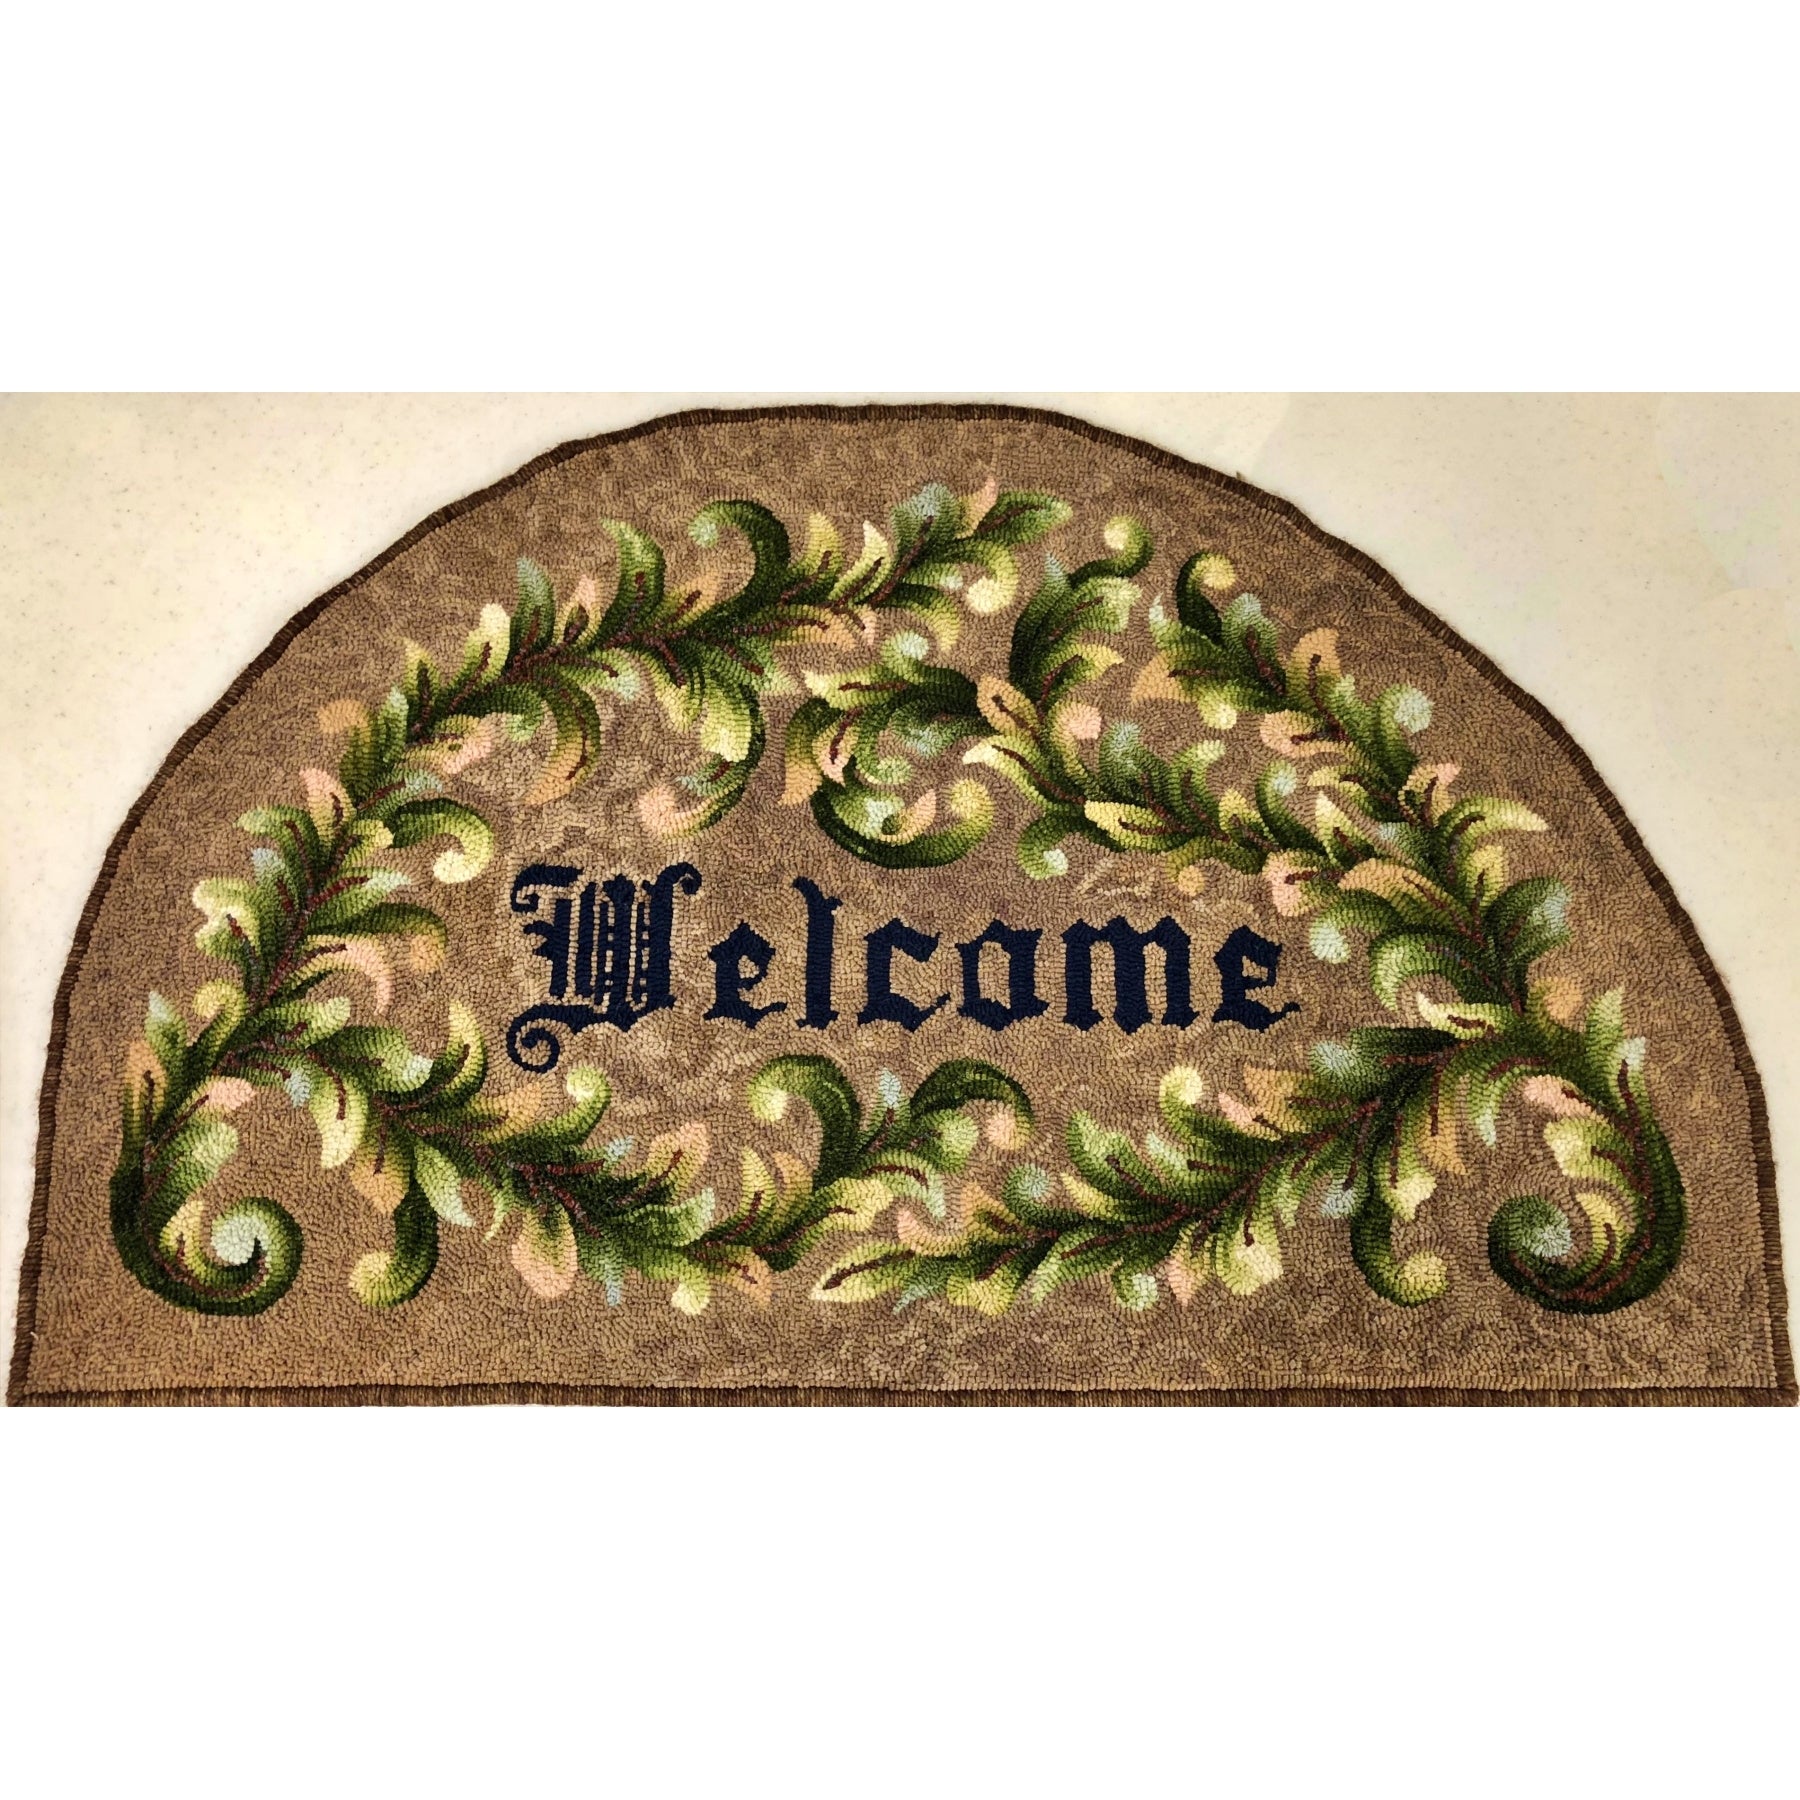 Scroll Welcome, rug hooked by Claudia Lampley